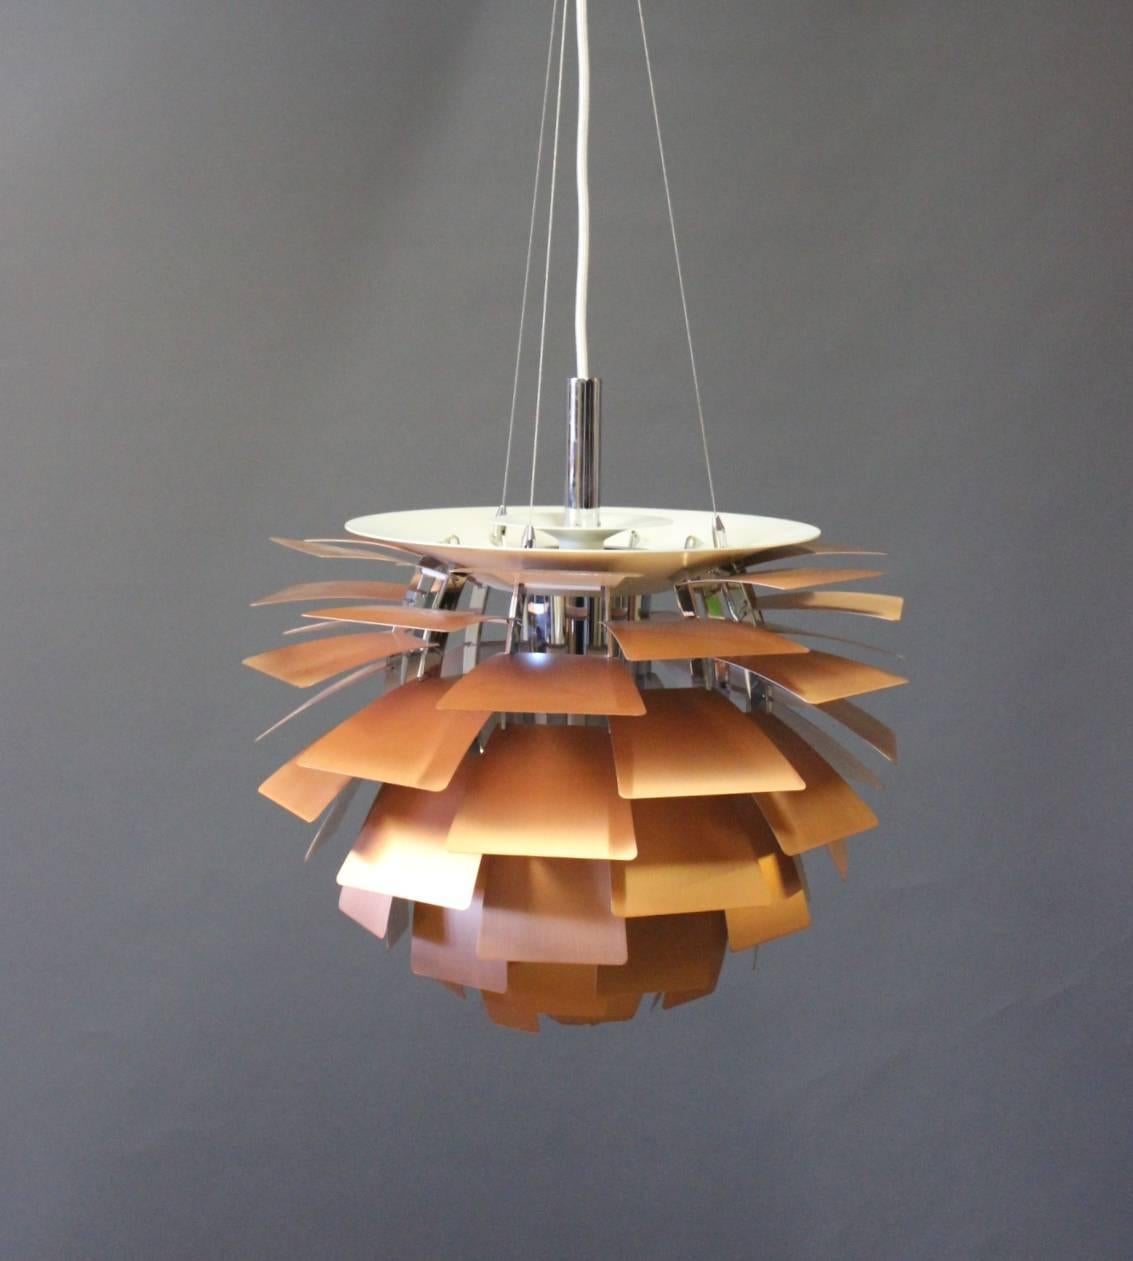 An all time eye catcher in lightning design. This copper version of Poul Henningsen's Artichoke measures 48 cm in diameter. This item is therefor very usable many places around your home. 

This product will be inspected thoroughly at our